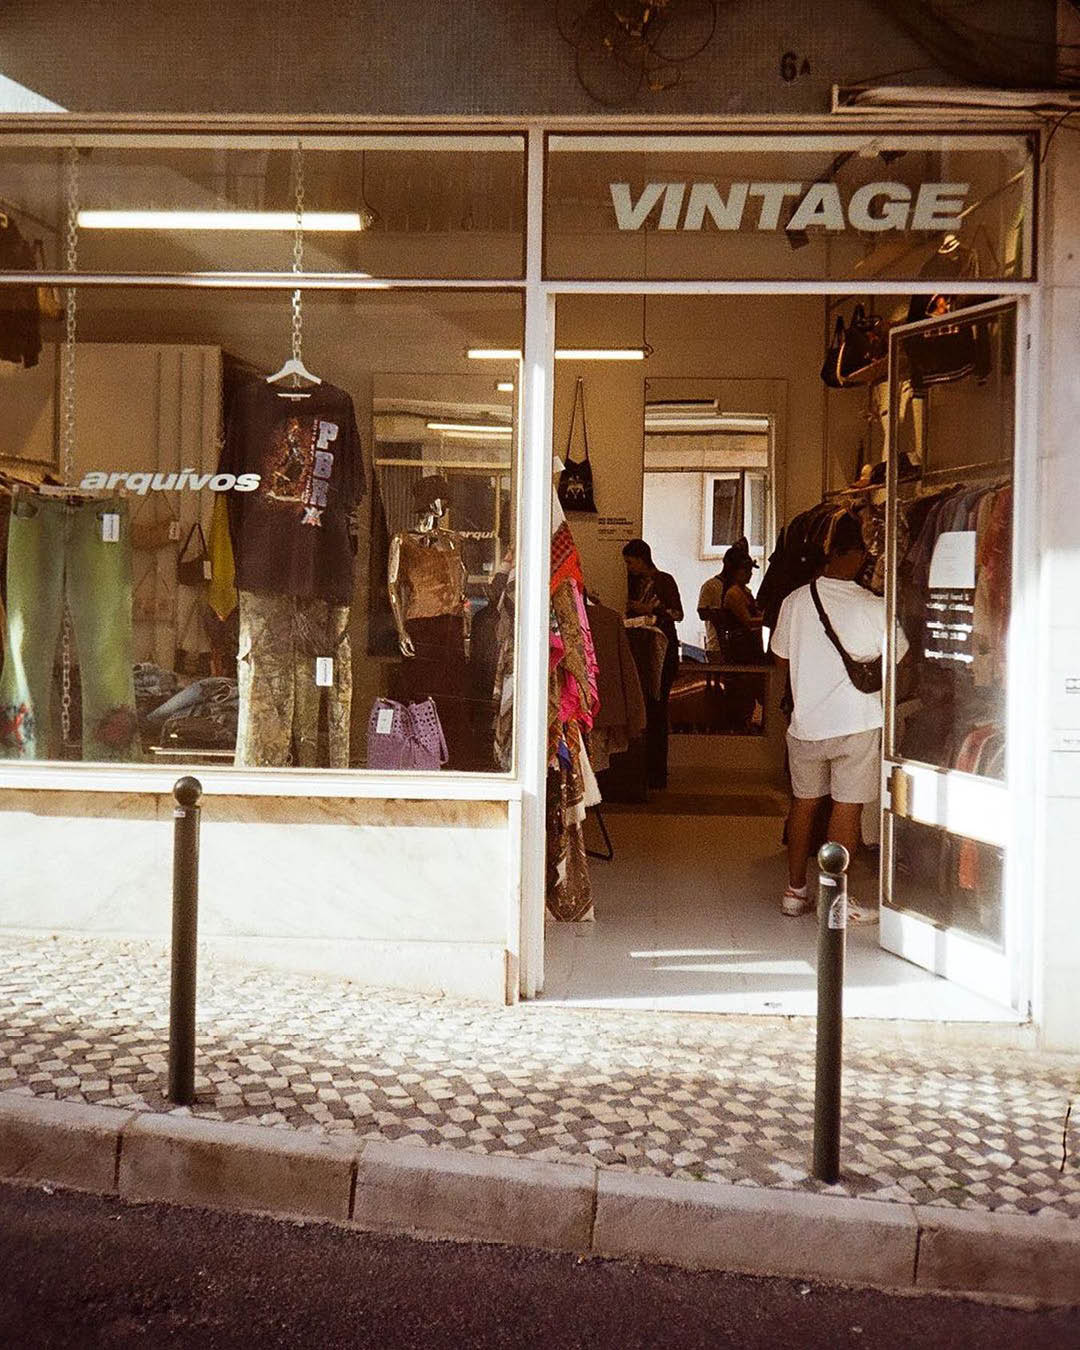 Arquívos shop front in Lisbon, with the word 'VINTAGE' embossed upon the glass entrance, with a cobbled street outside.